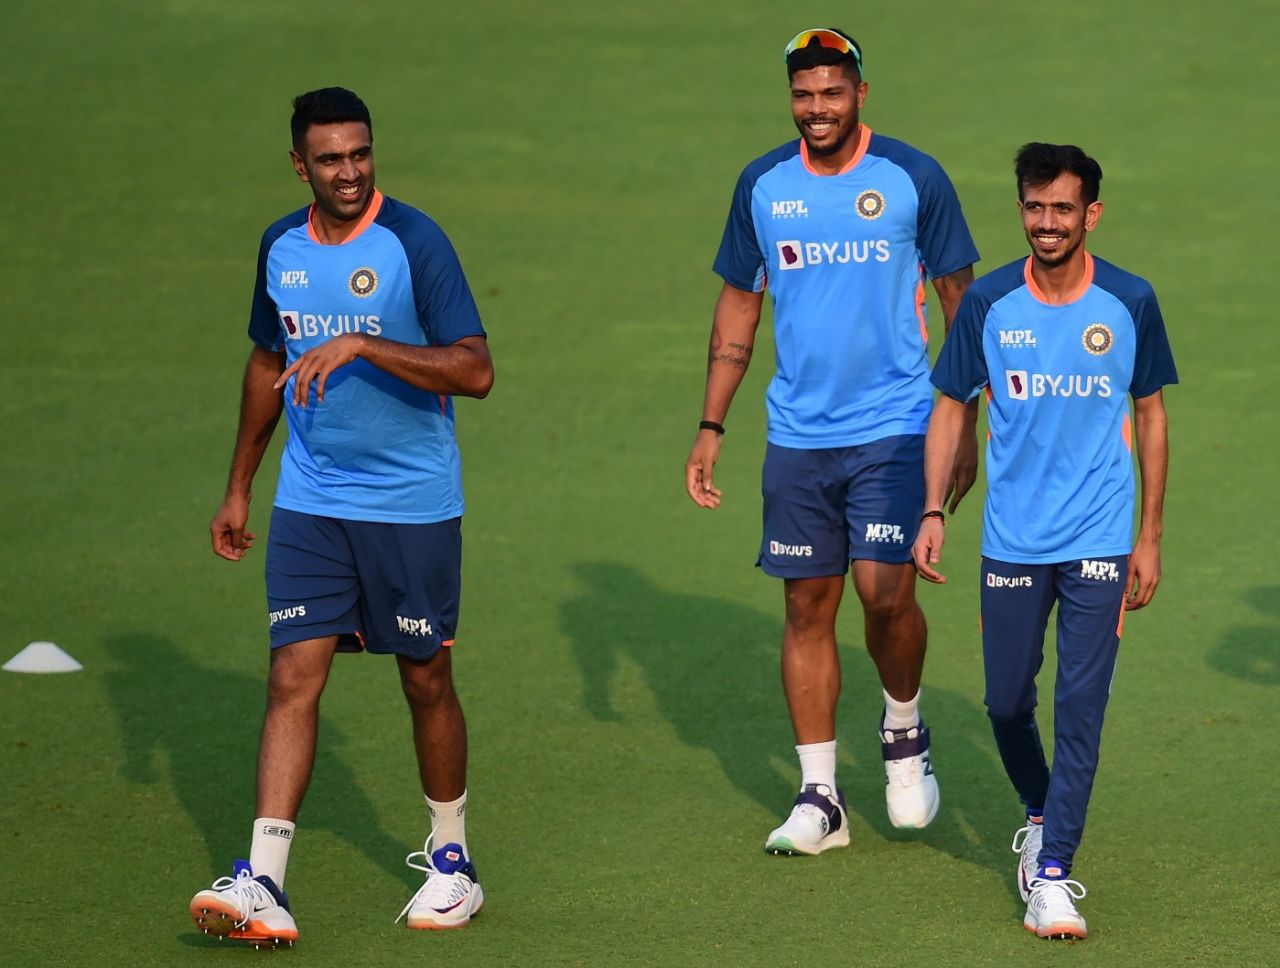 IND vs AUS LIVE: India in MUST-WIN situation, 3 areas to improve on for Rohit Sharma & Co. Yuzvendra Chahal, Dinesh Karthik, Jasprit Bumrah, India vs Australia